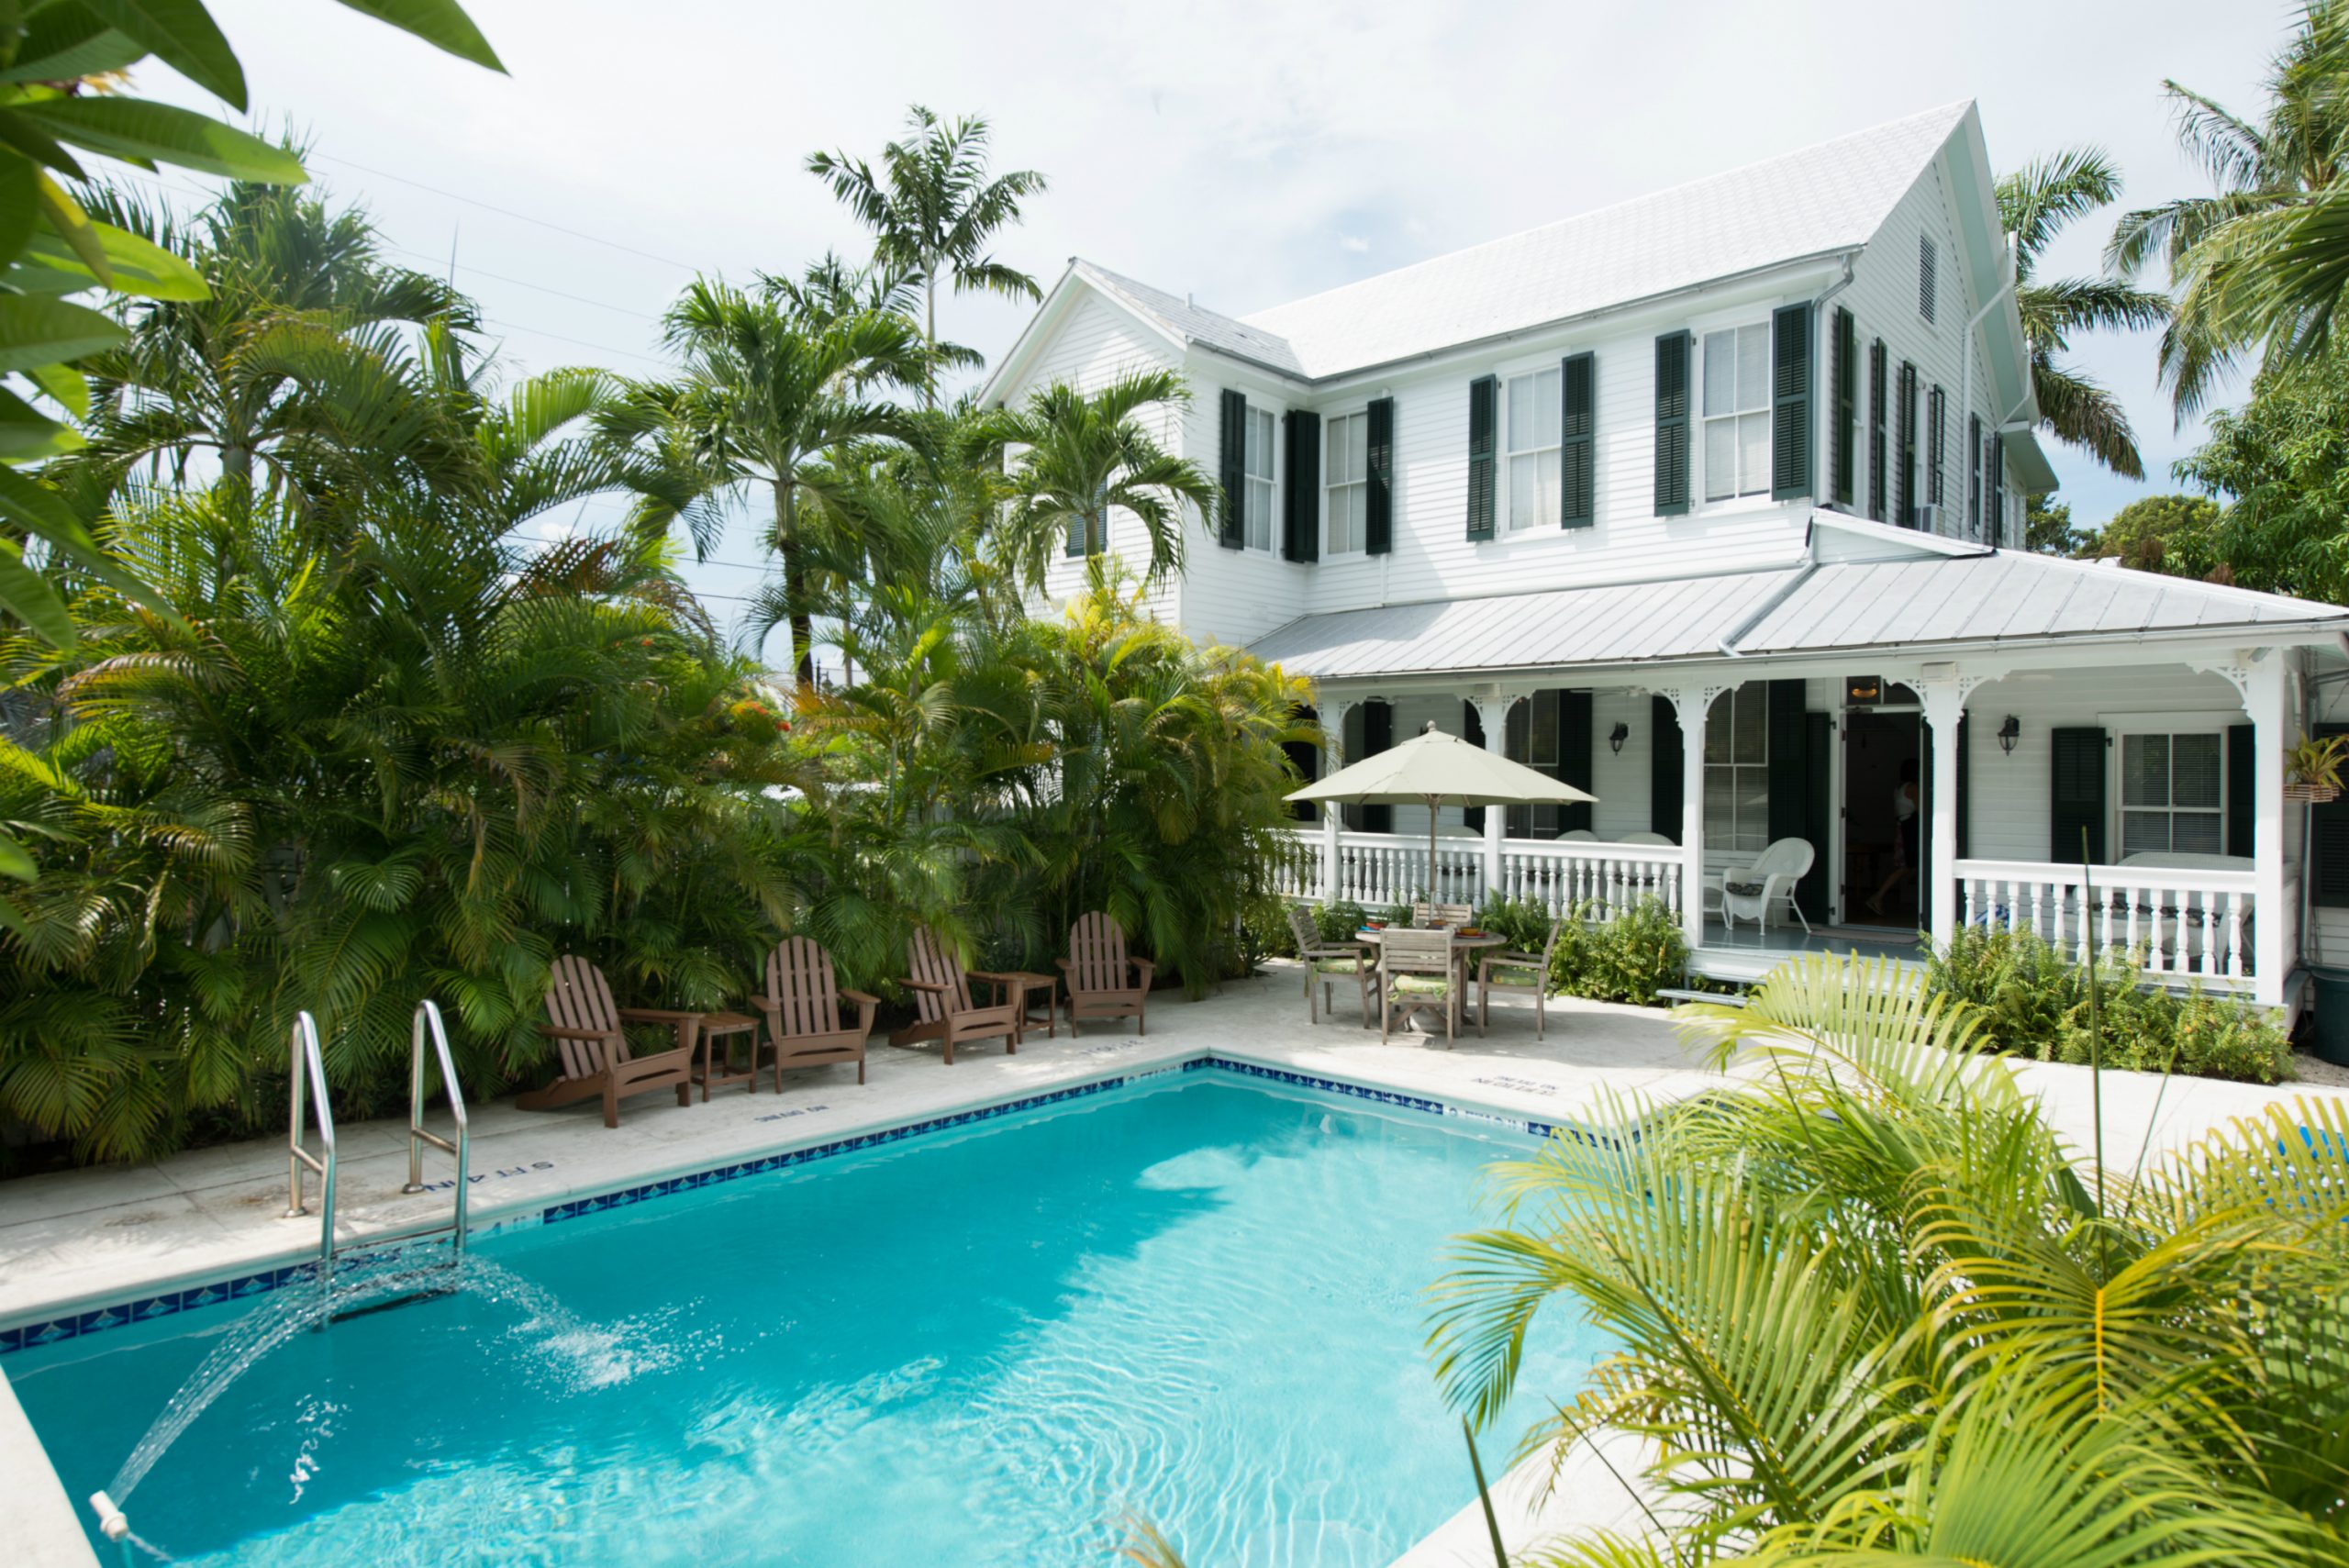 conch house heritage inn vacation rental key west